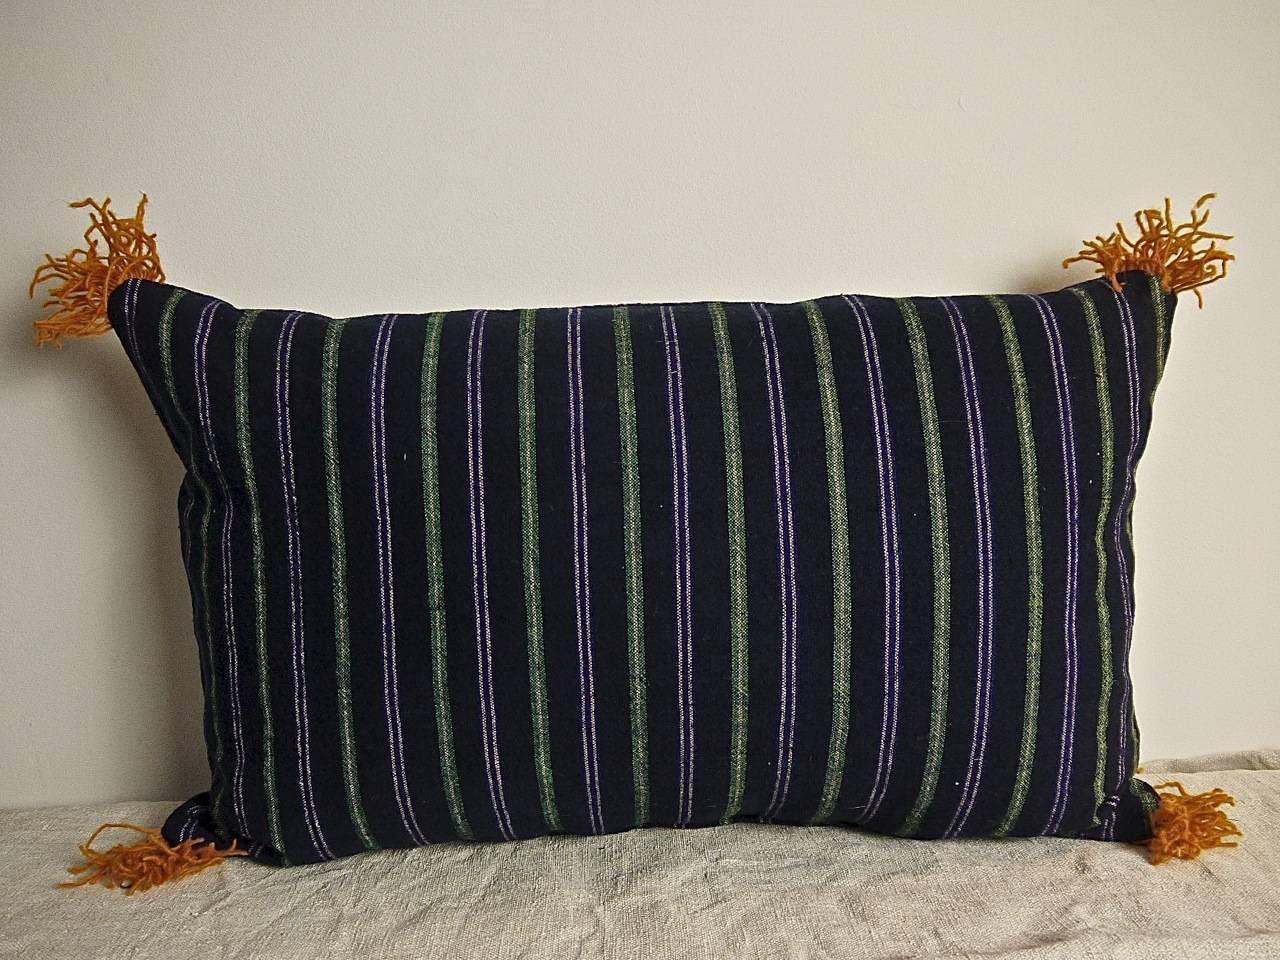 French 19th century woven cotton and wool striped cushion.Dark indigo with white, green and purple in a pleasing combination.With hand dyed orange wool fringing on each corner.Backed in a natural indigo hand-dyed 19th century French